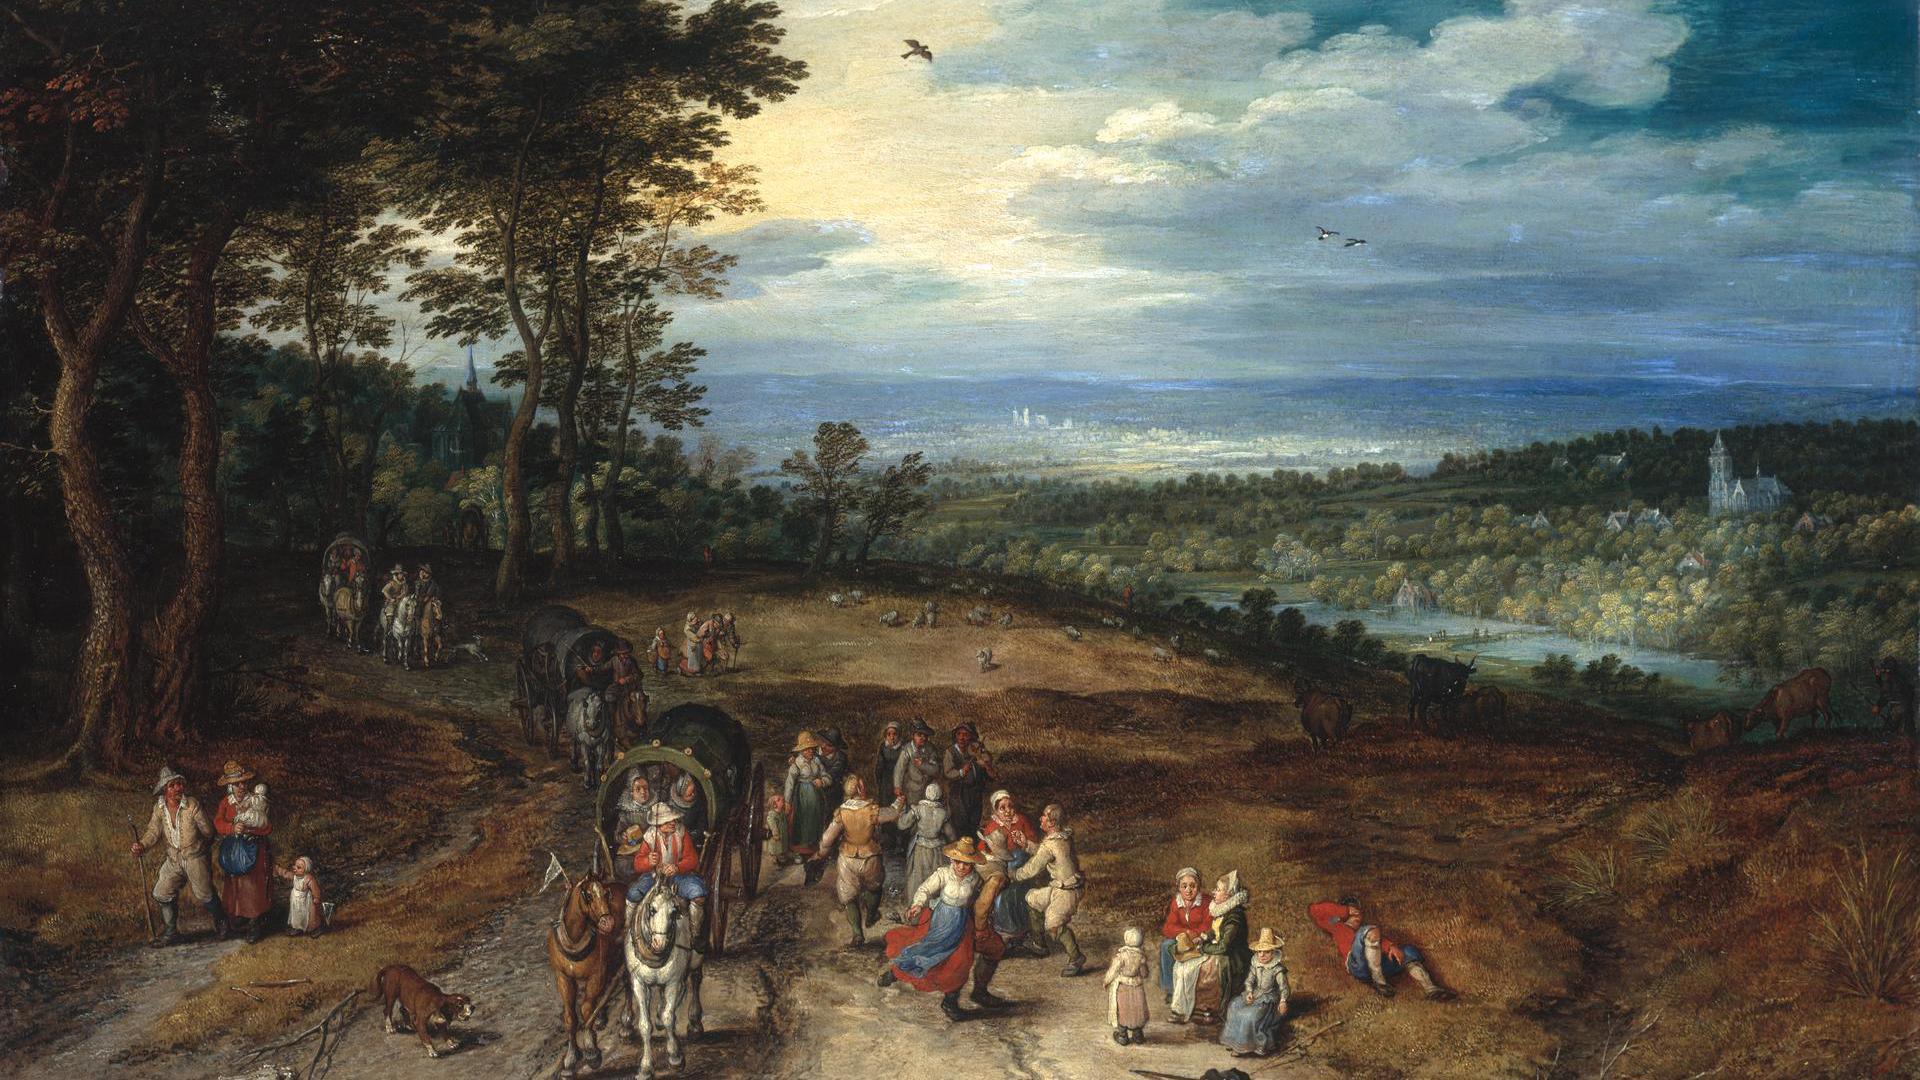 Landscape with Travellers and Peasants on a Track by Jan Brueghel the Elder